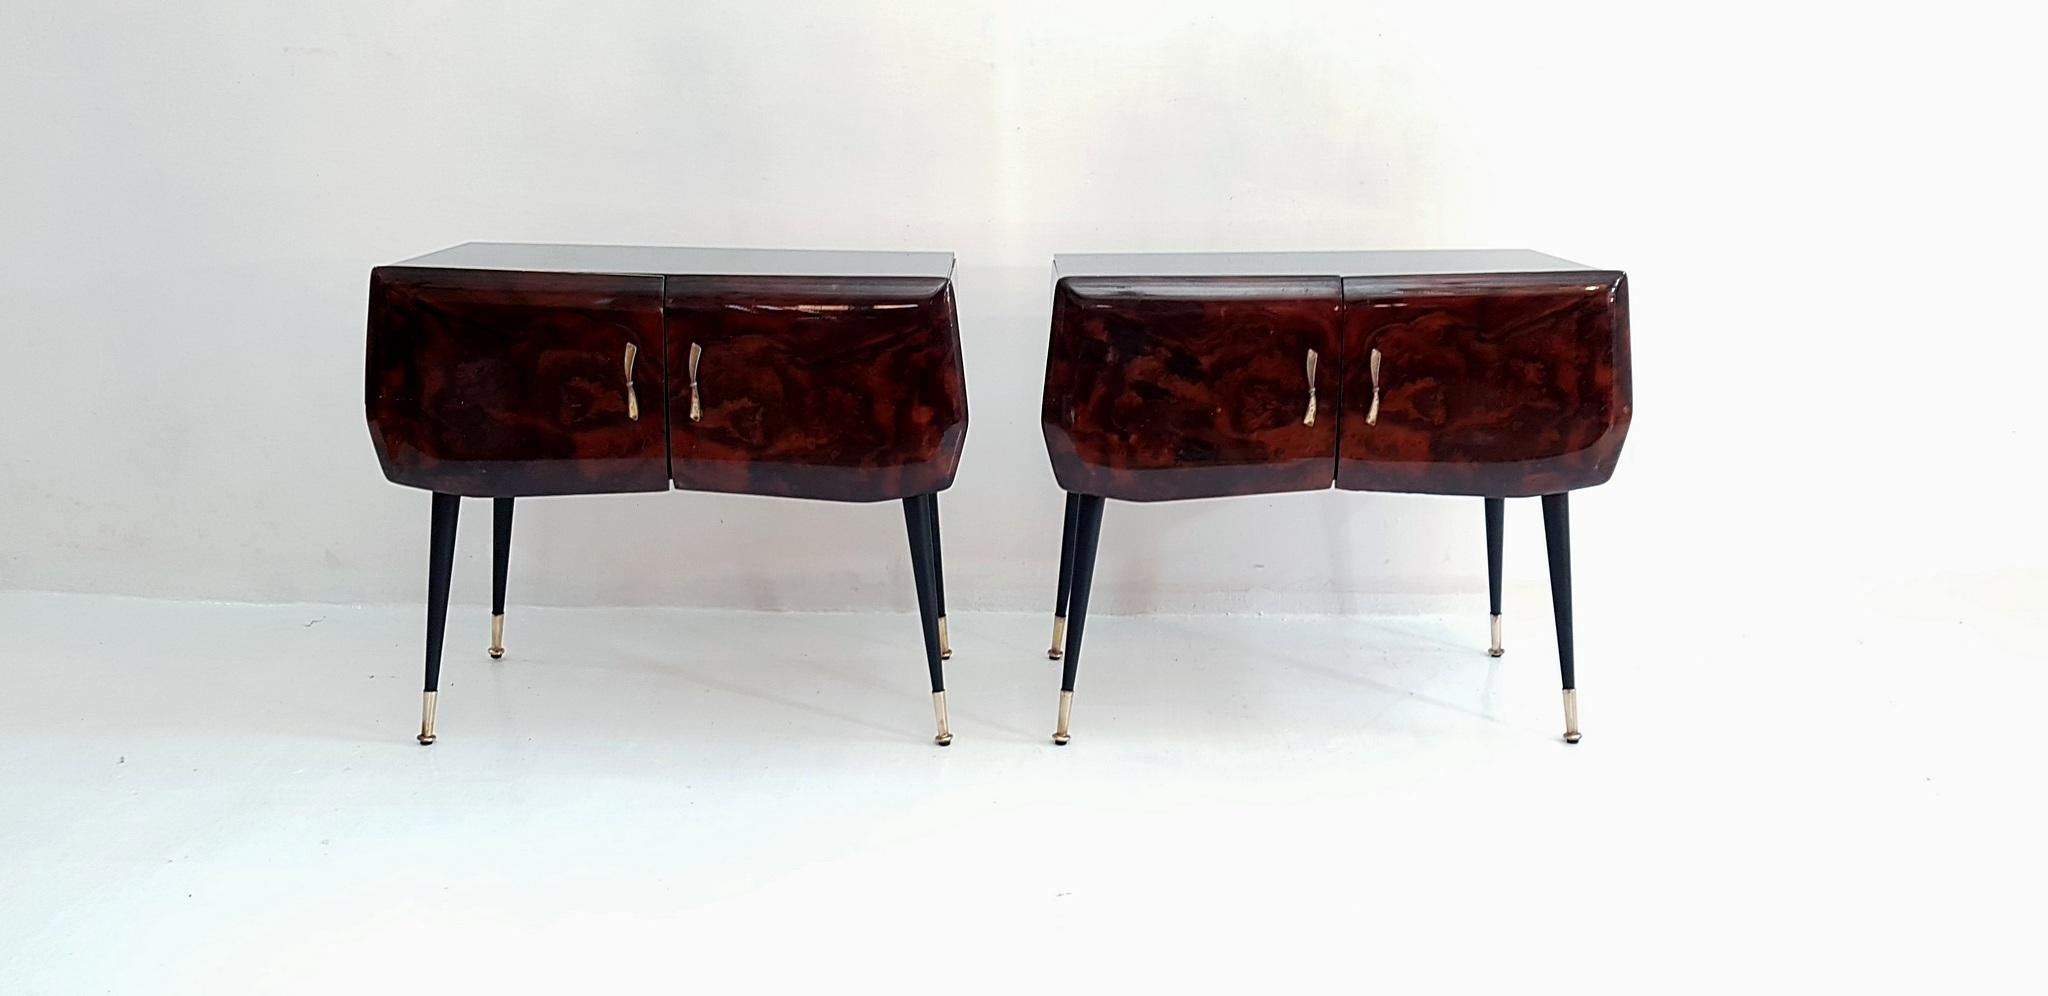 A pair of beautiful Italian nightstands resting on spider legs in iron and brass with double doors, each with handles in brass made to look like bows. They have a black glass top and the front of the doors has veneer from maple root. The inside are